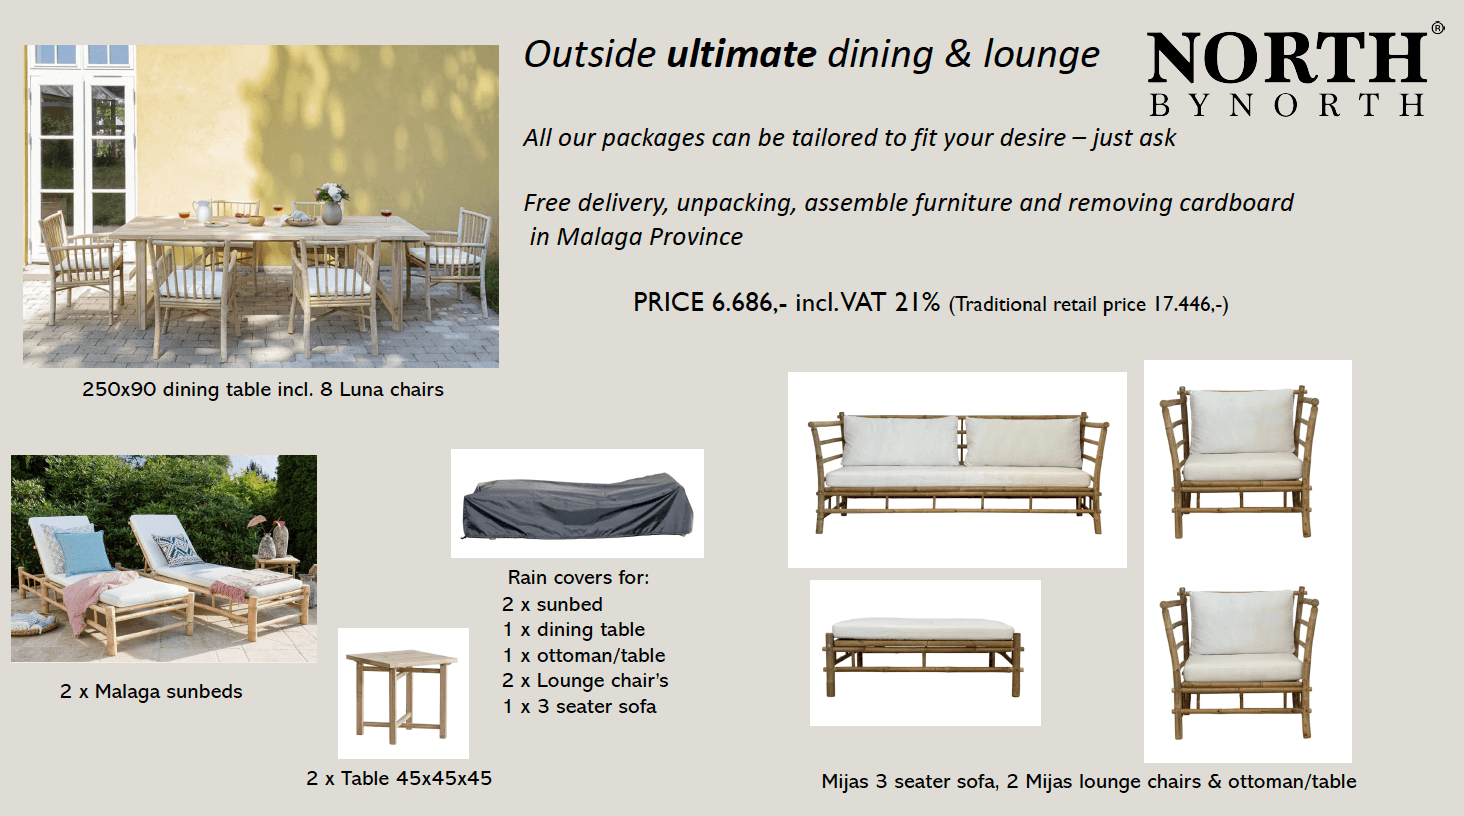 Outside ultimate dining & lounge